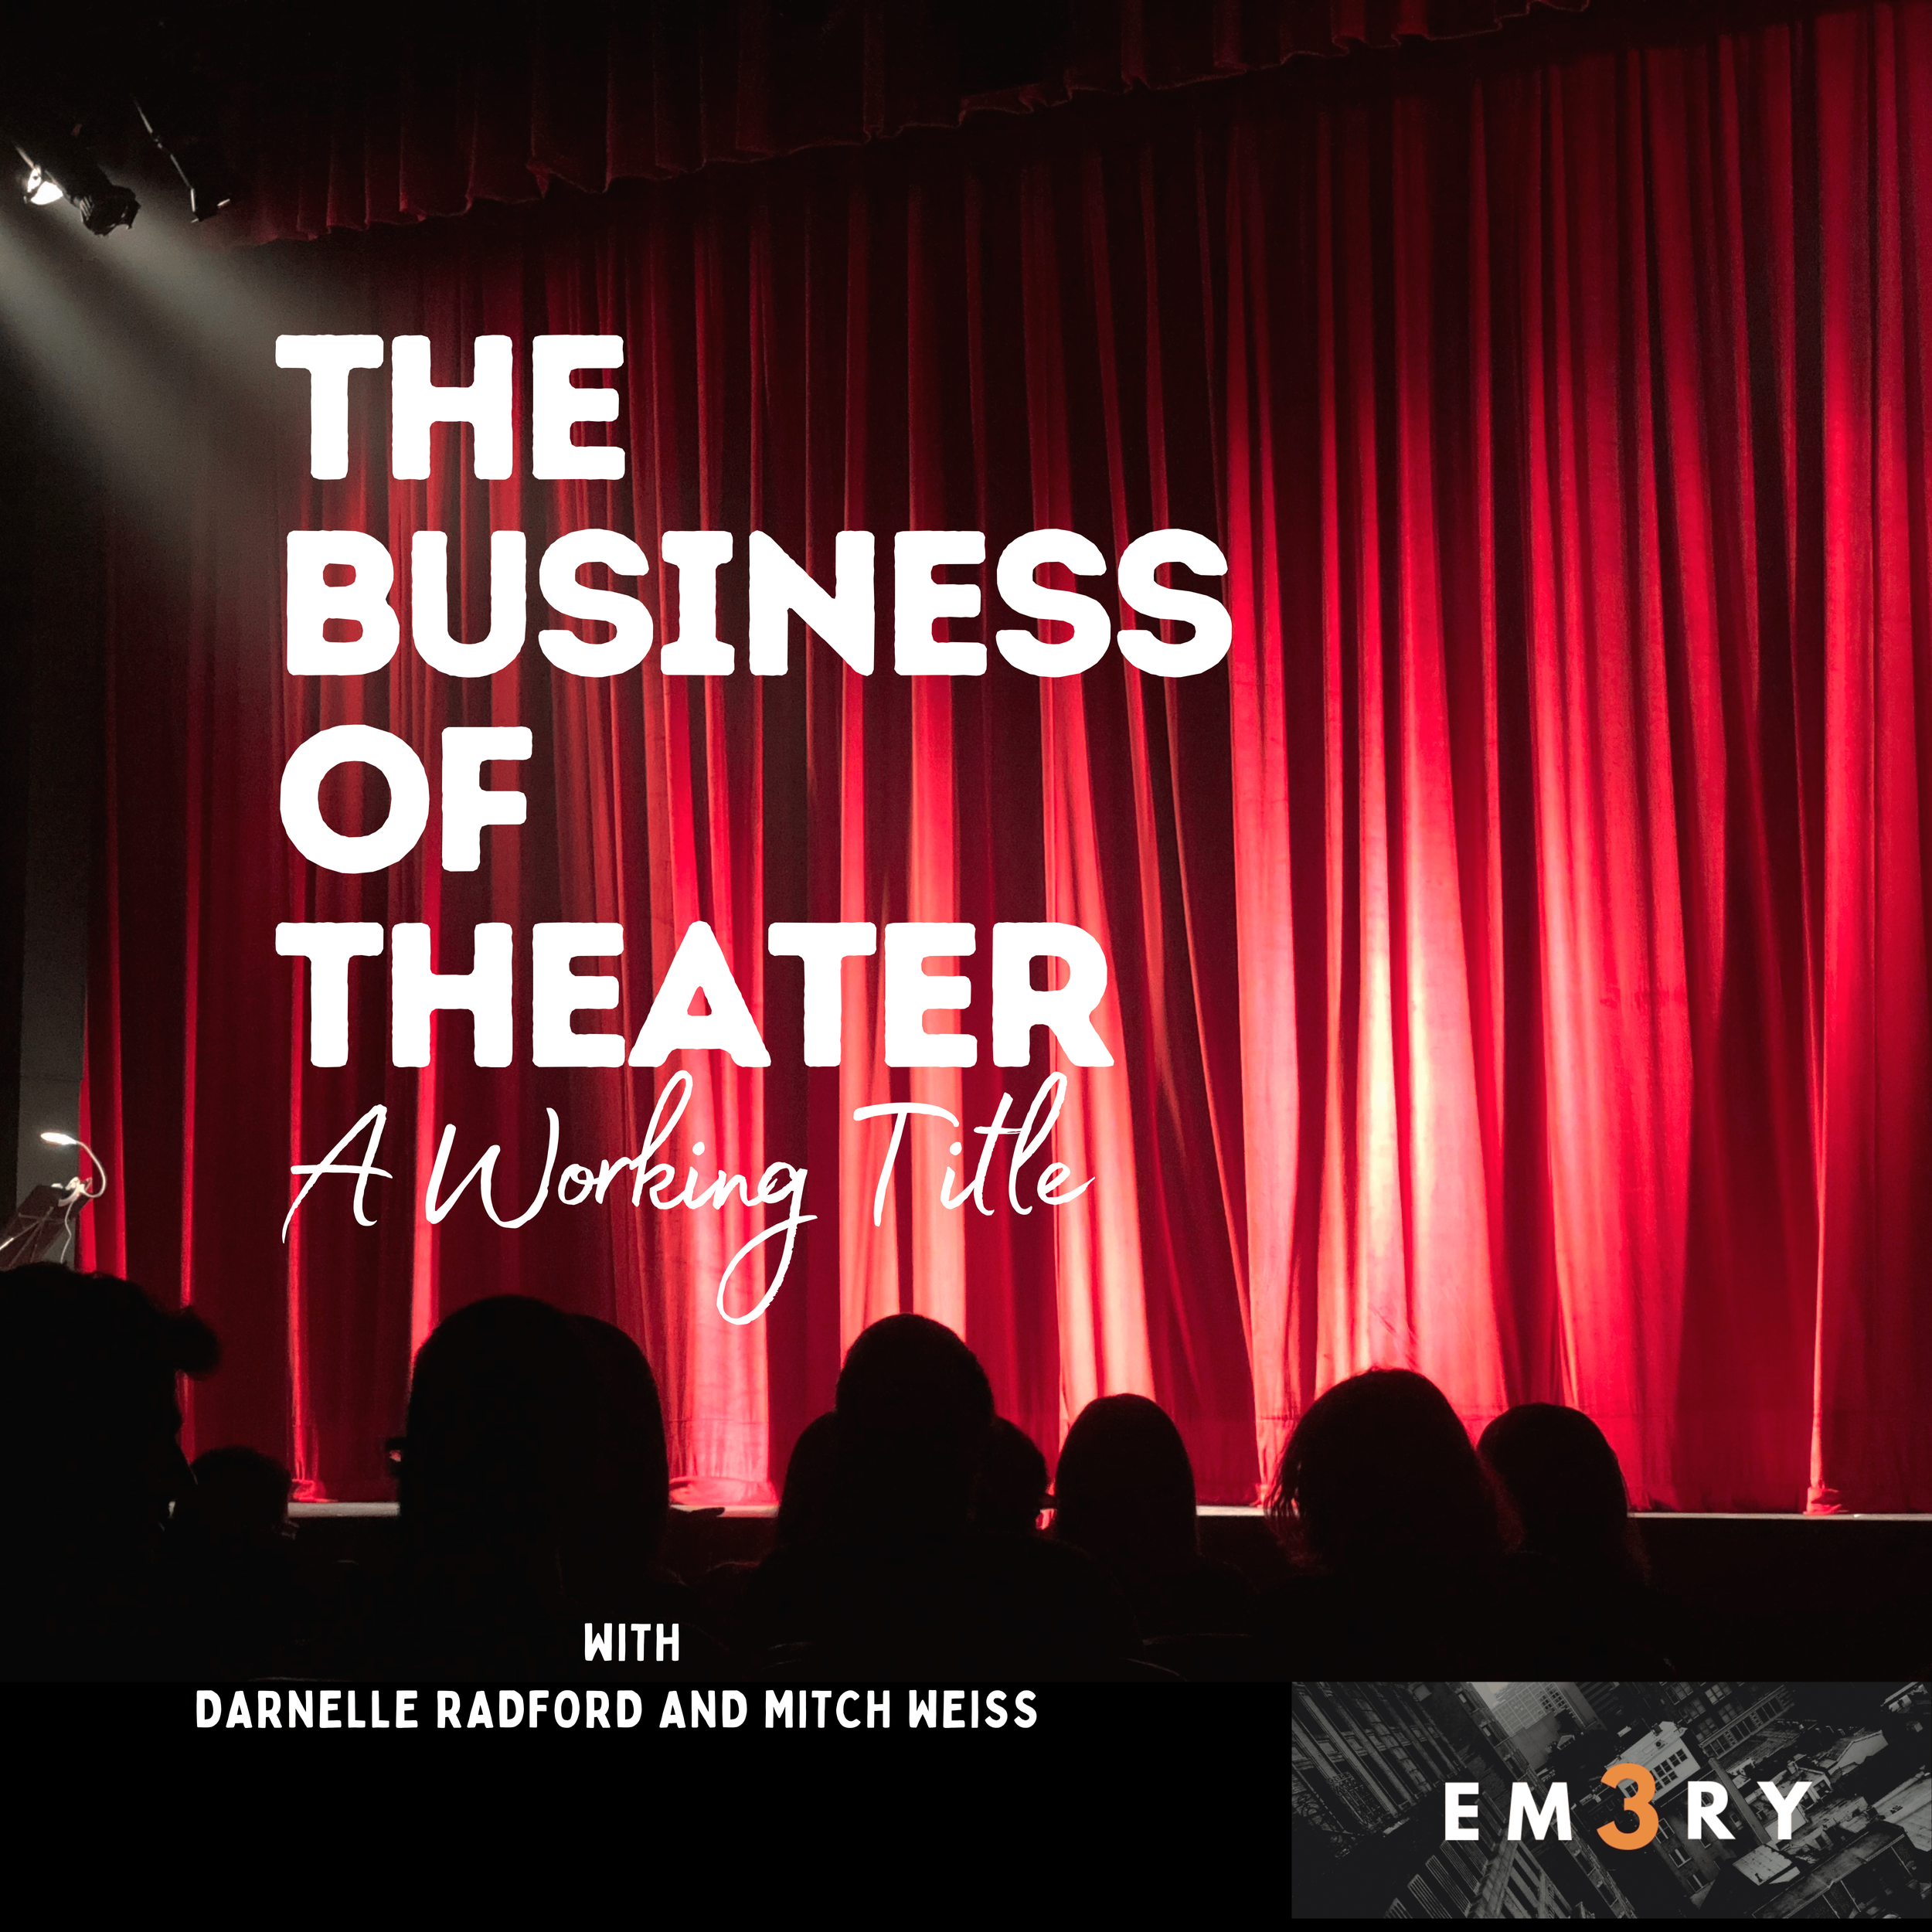 The Business of Theater, A Working Title